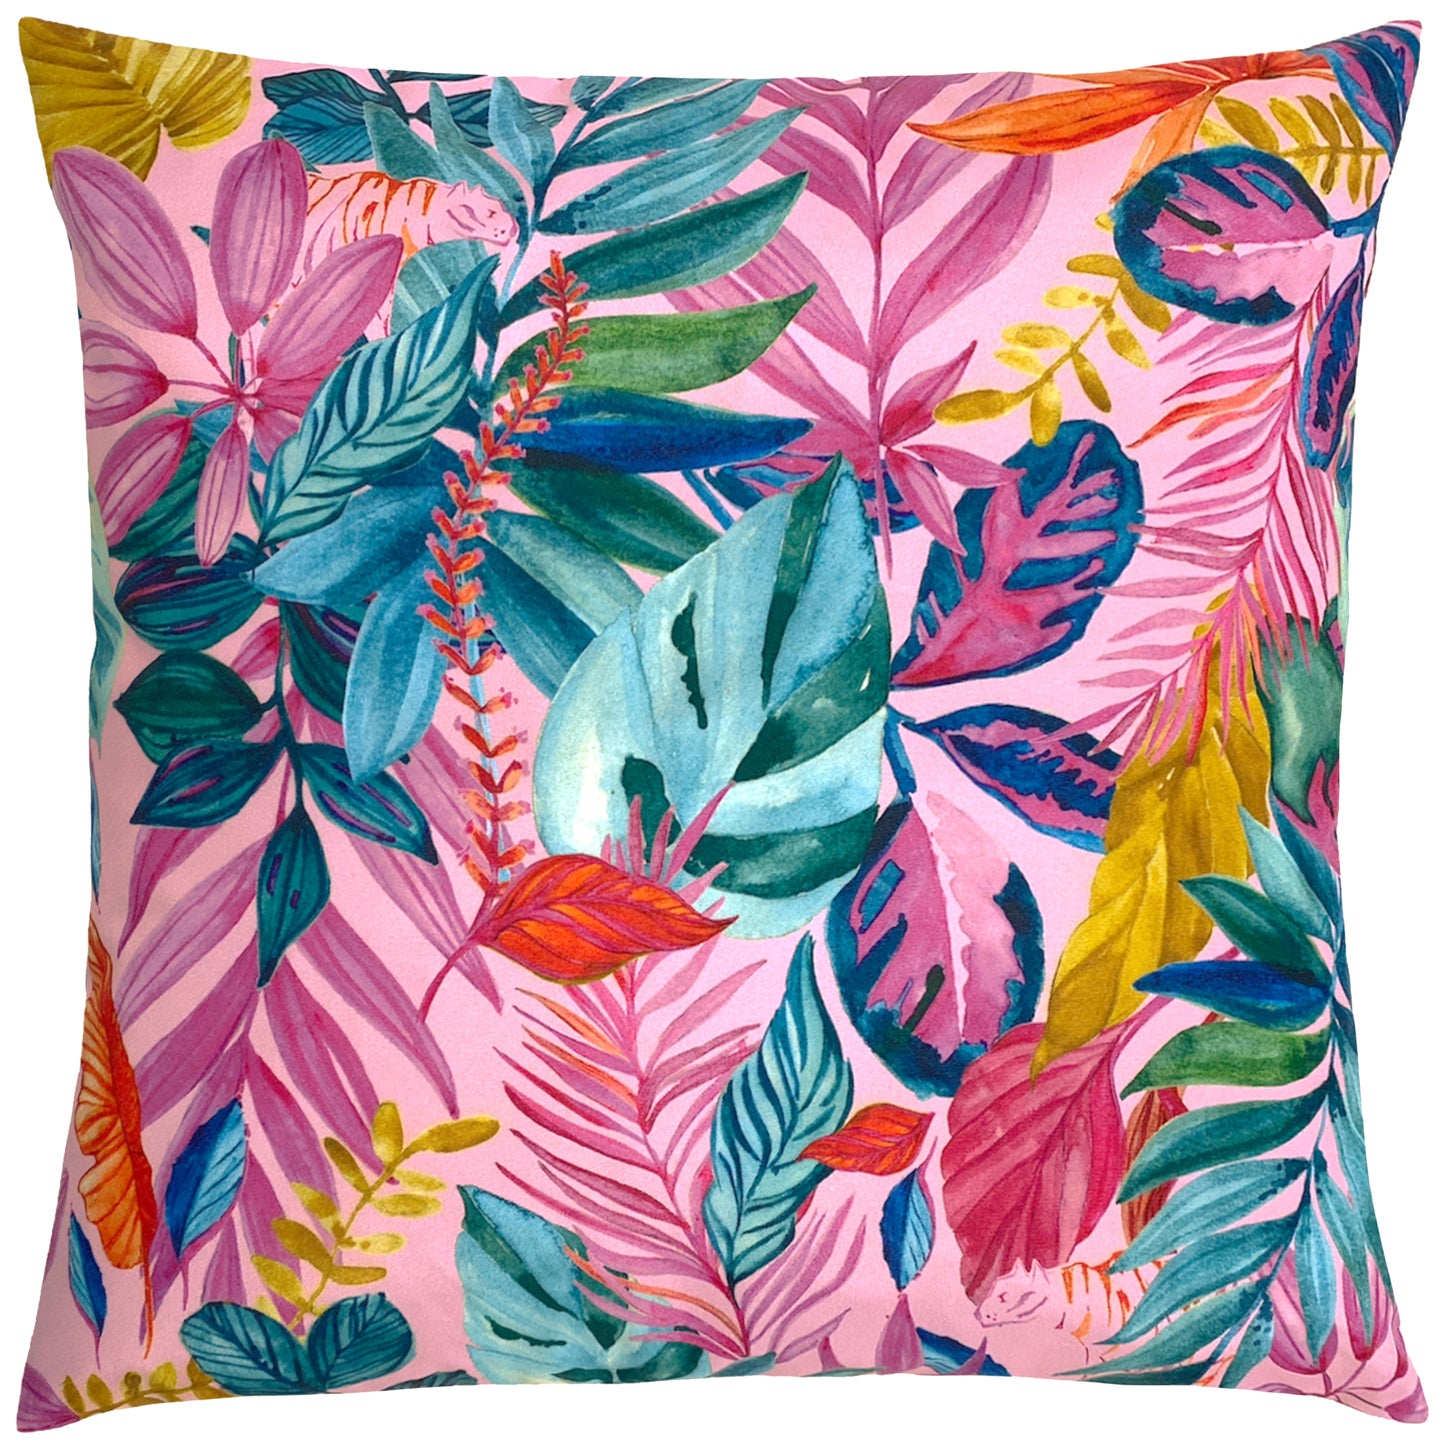 Decorative Outdoor Cushion "Psychedelic"